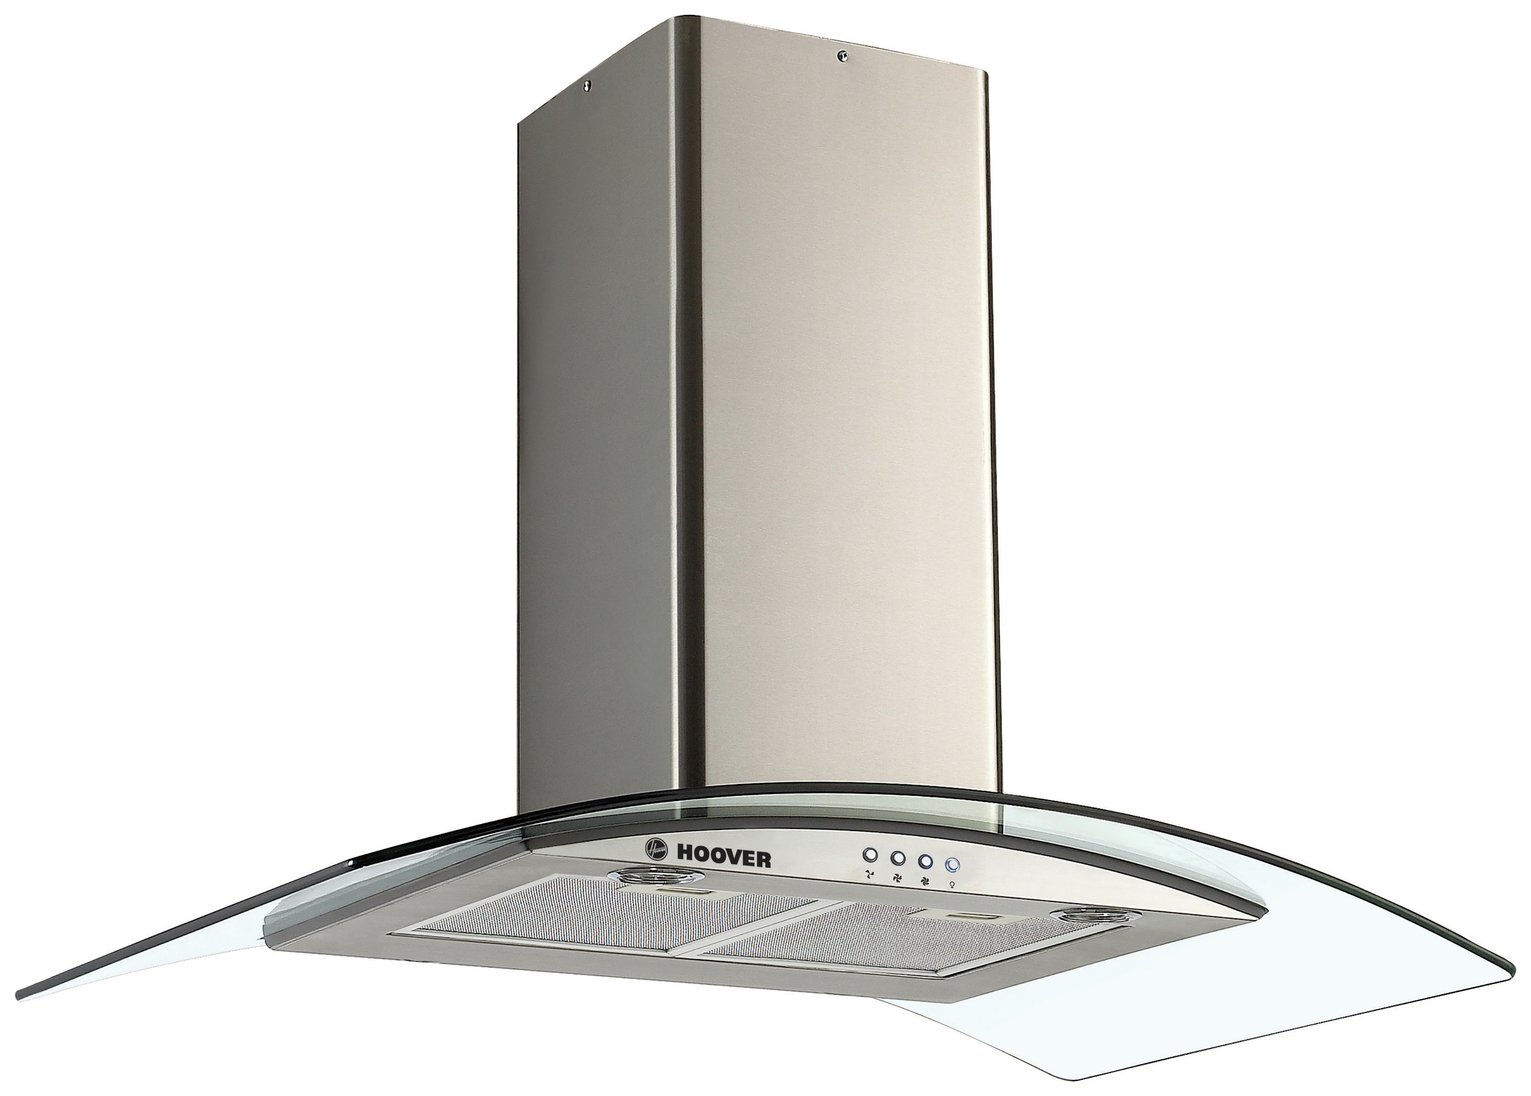 Hoover HGM900X 90cm Cooker Hood - Stainless Steel